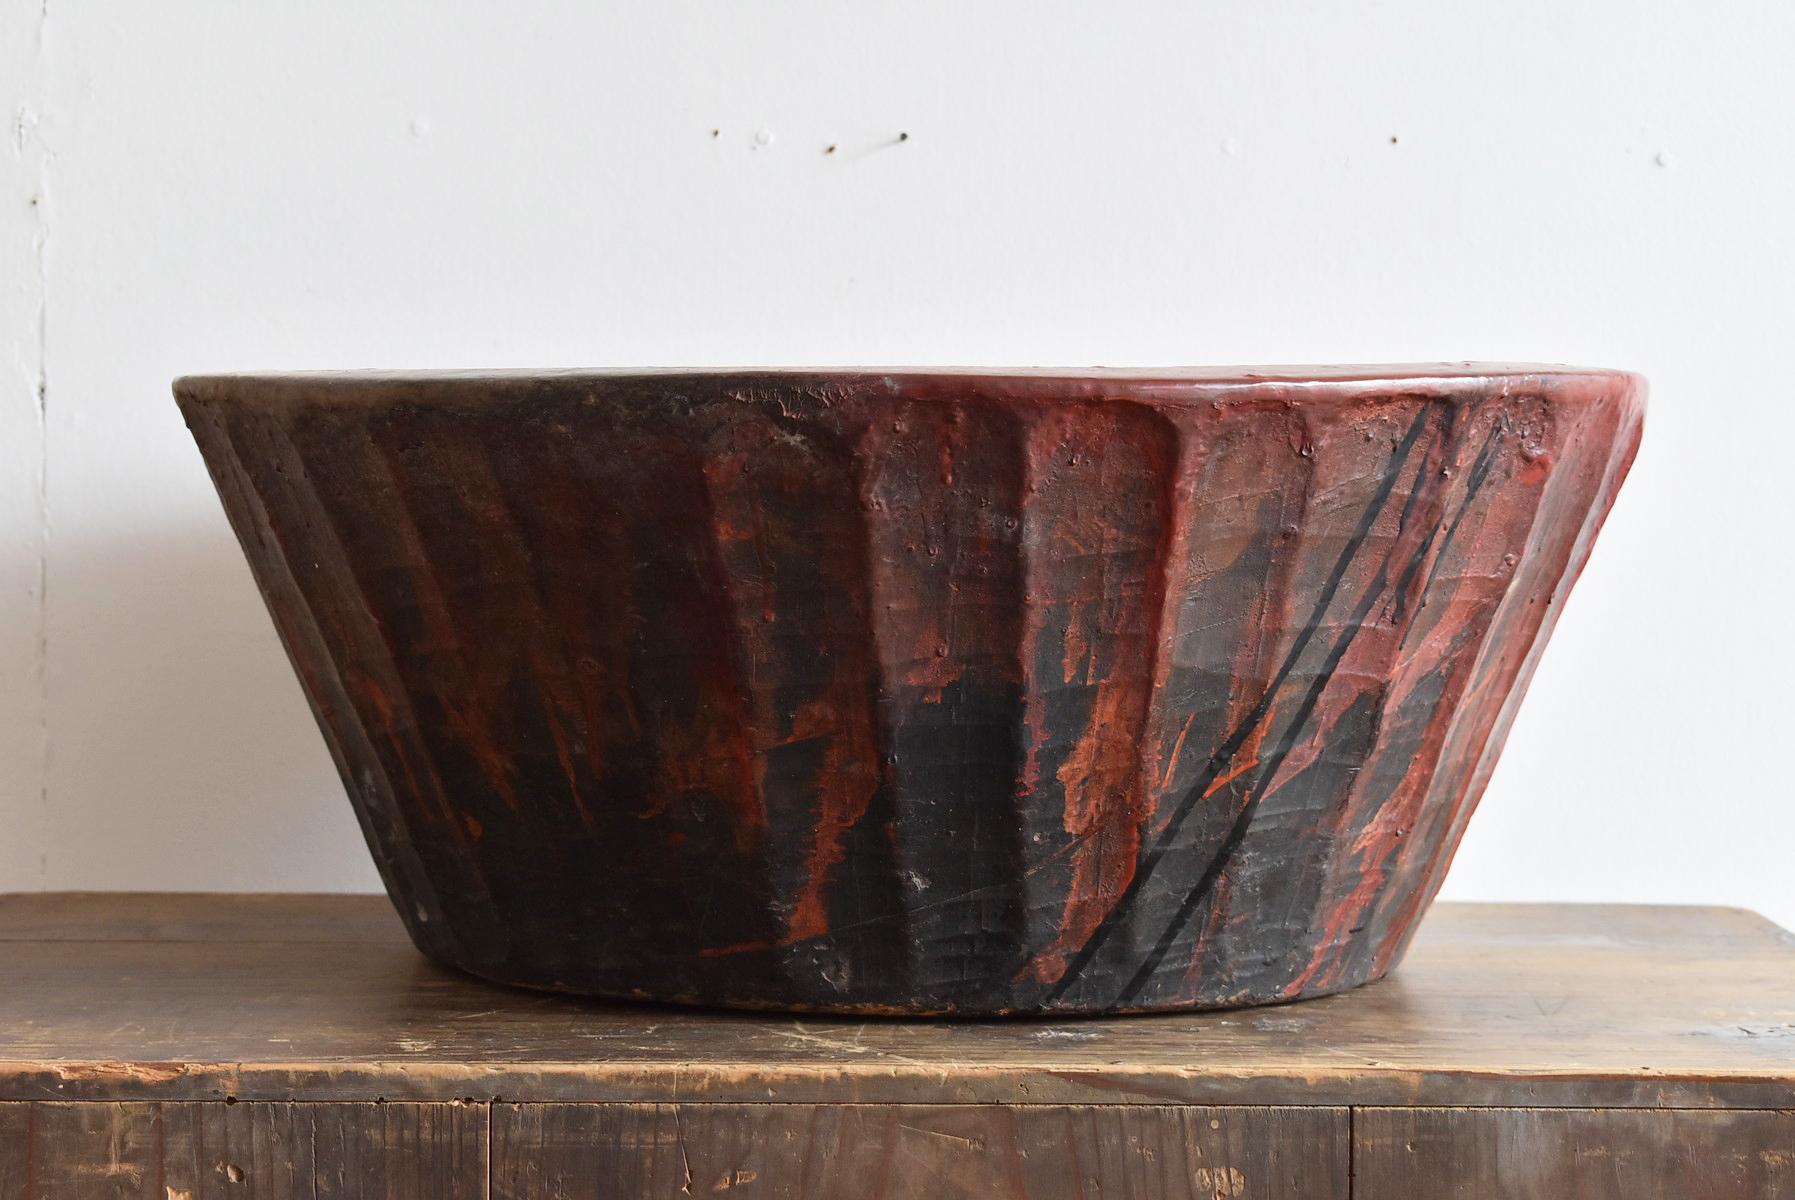 19th Century Lacquer Wooden Bowl Used by Japanese Lacquer Craftsmen / Antique Lacquerware Too